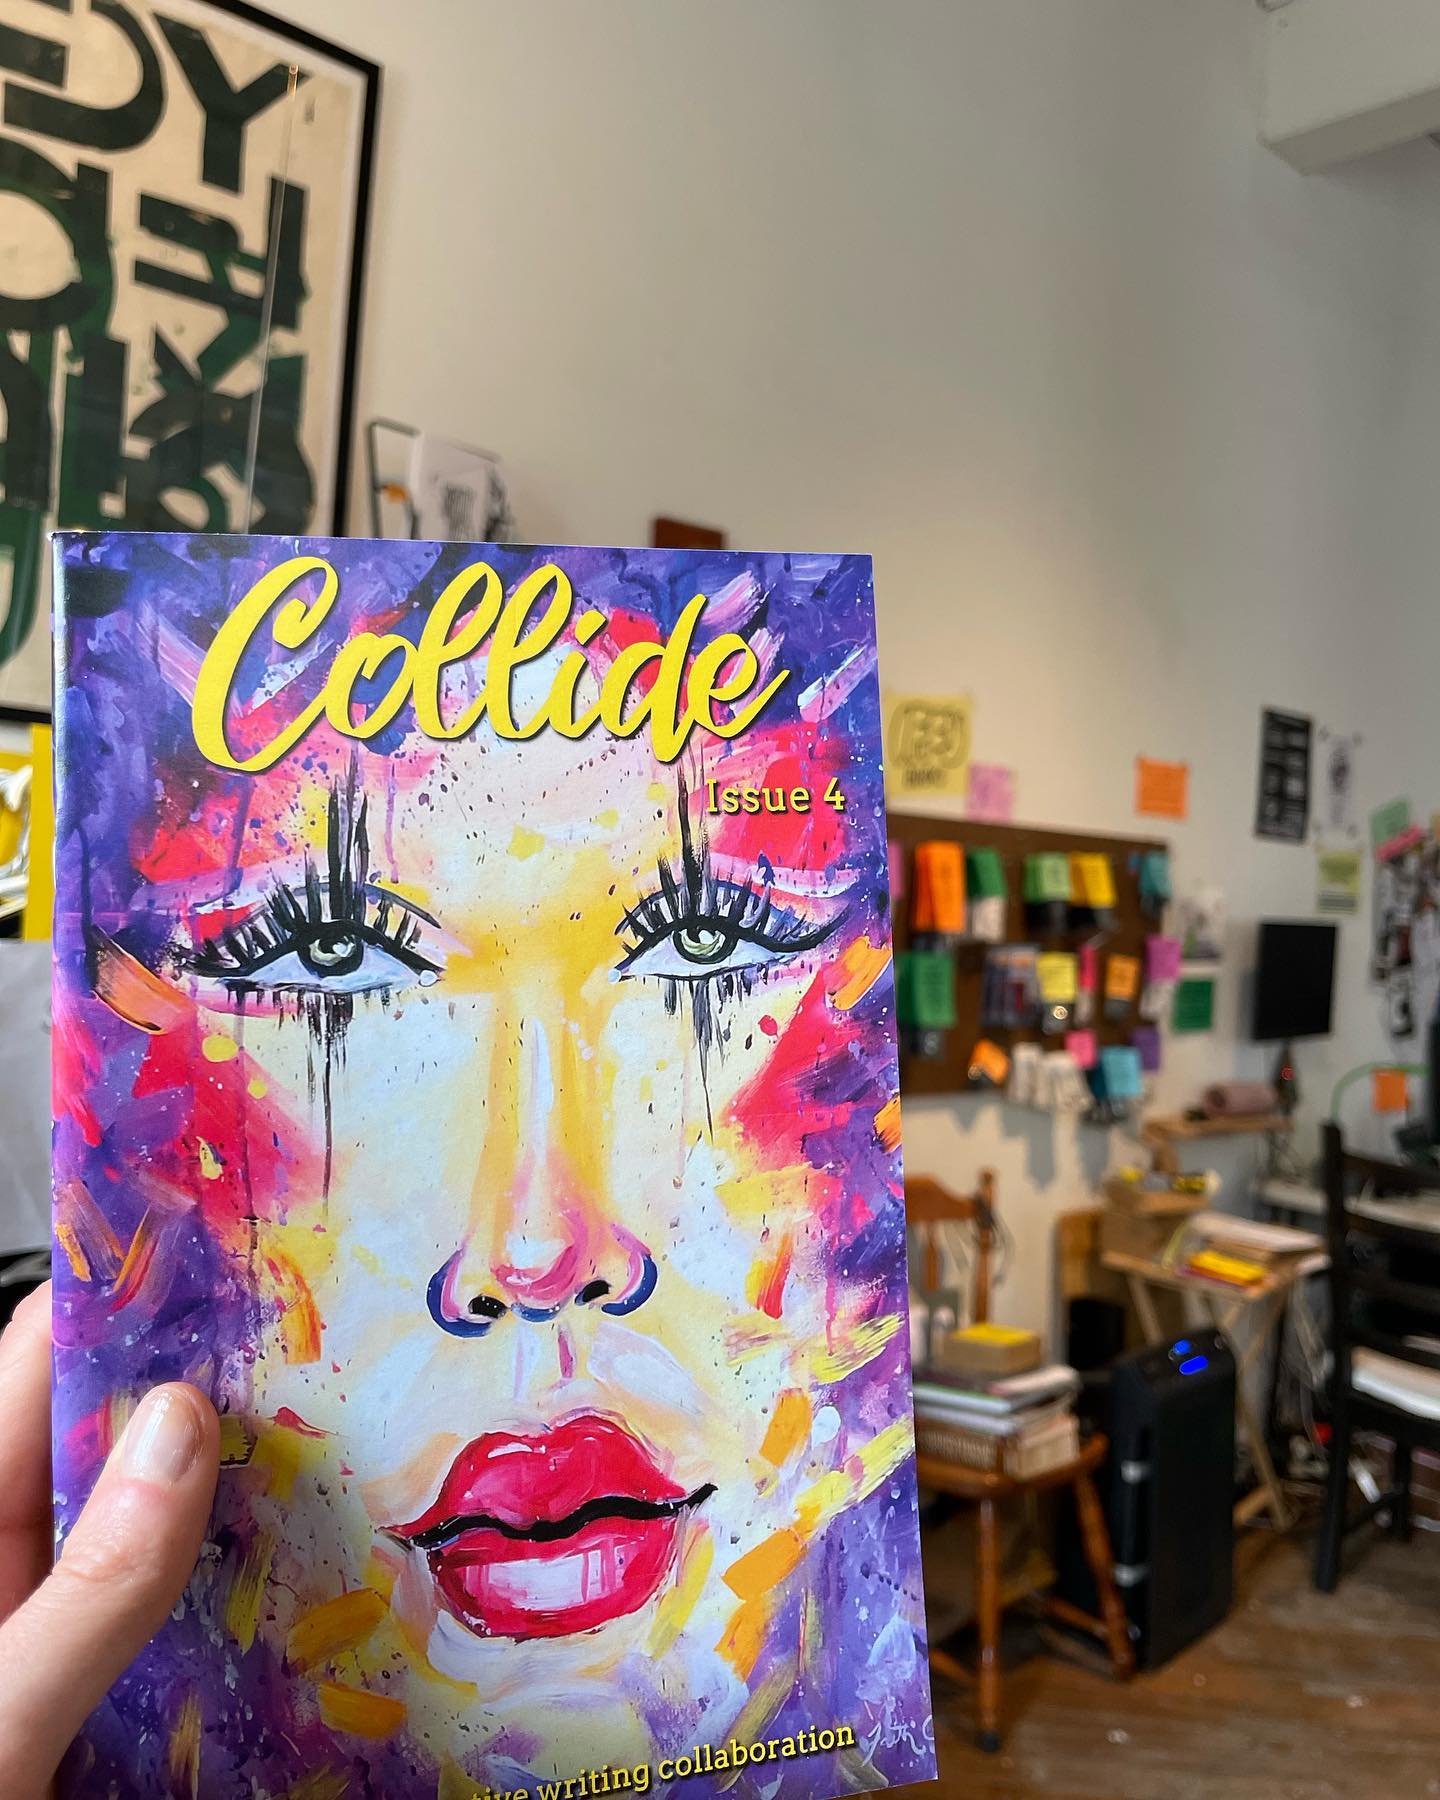 A hand holding up Collide Zine issue 4 at Iffy Books. The cover has a painting of a woman's face with bright red lips and red and purple splotches around the edges.